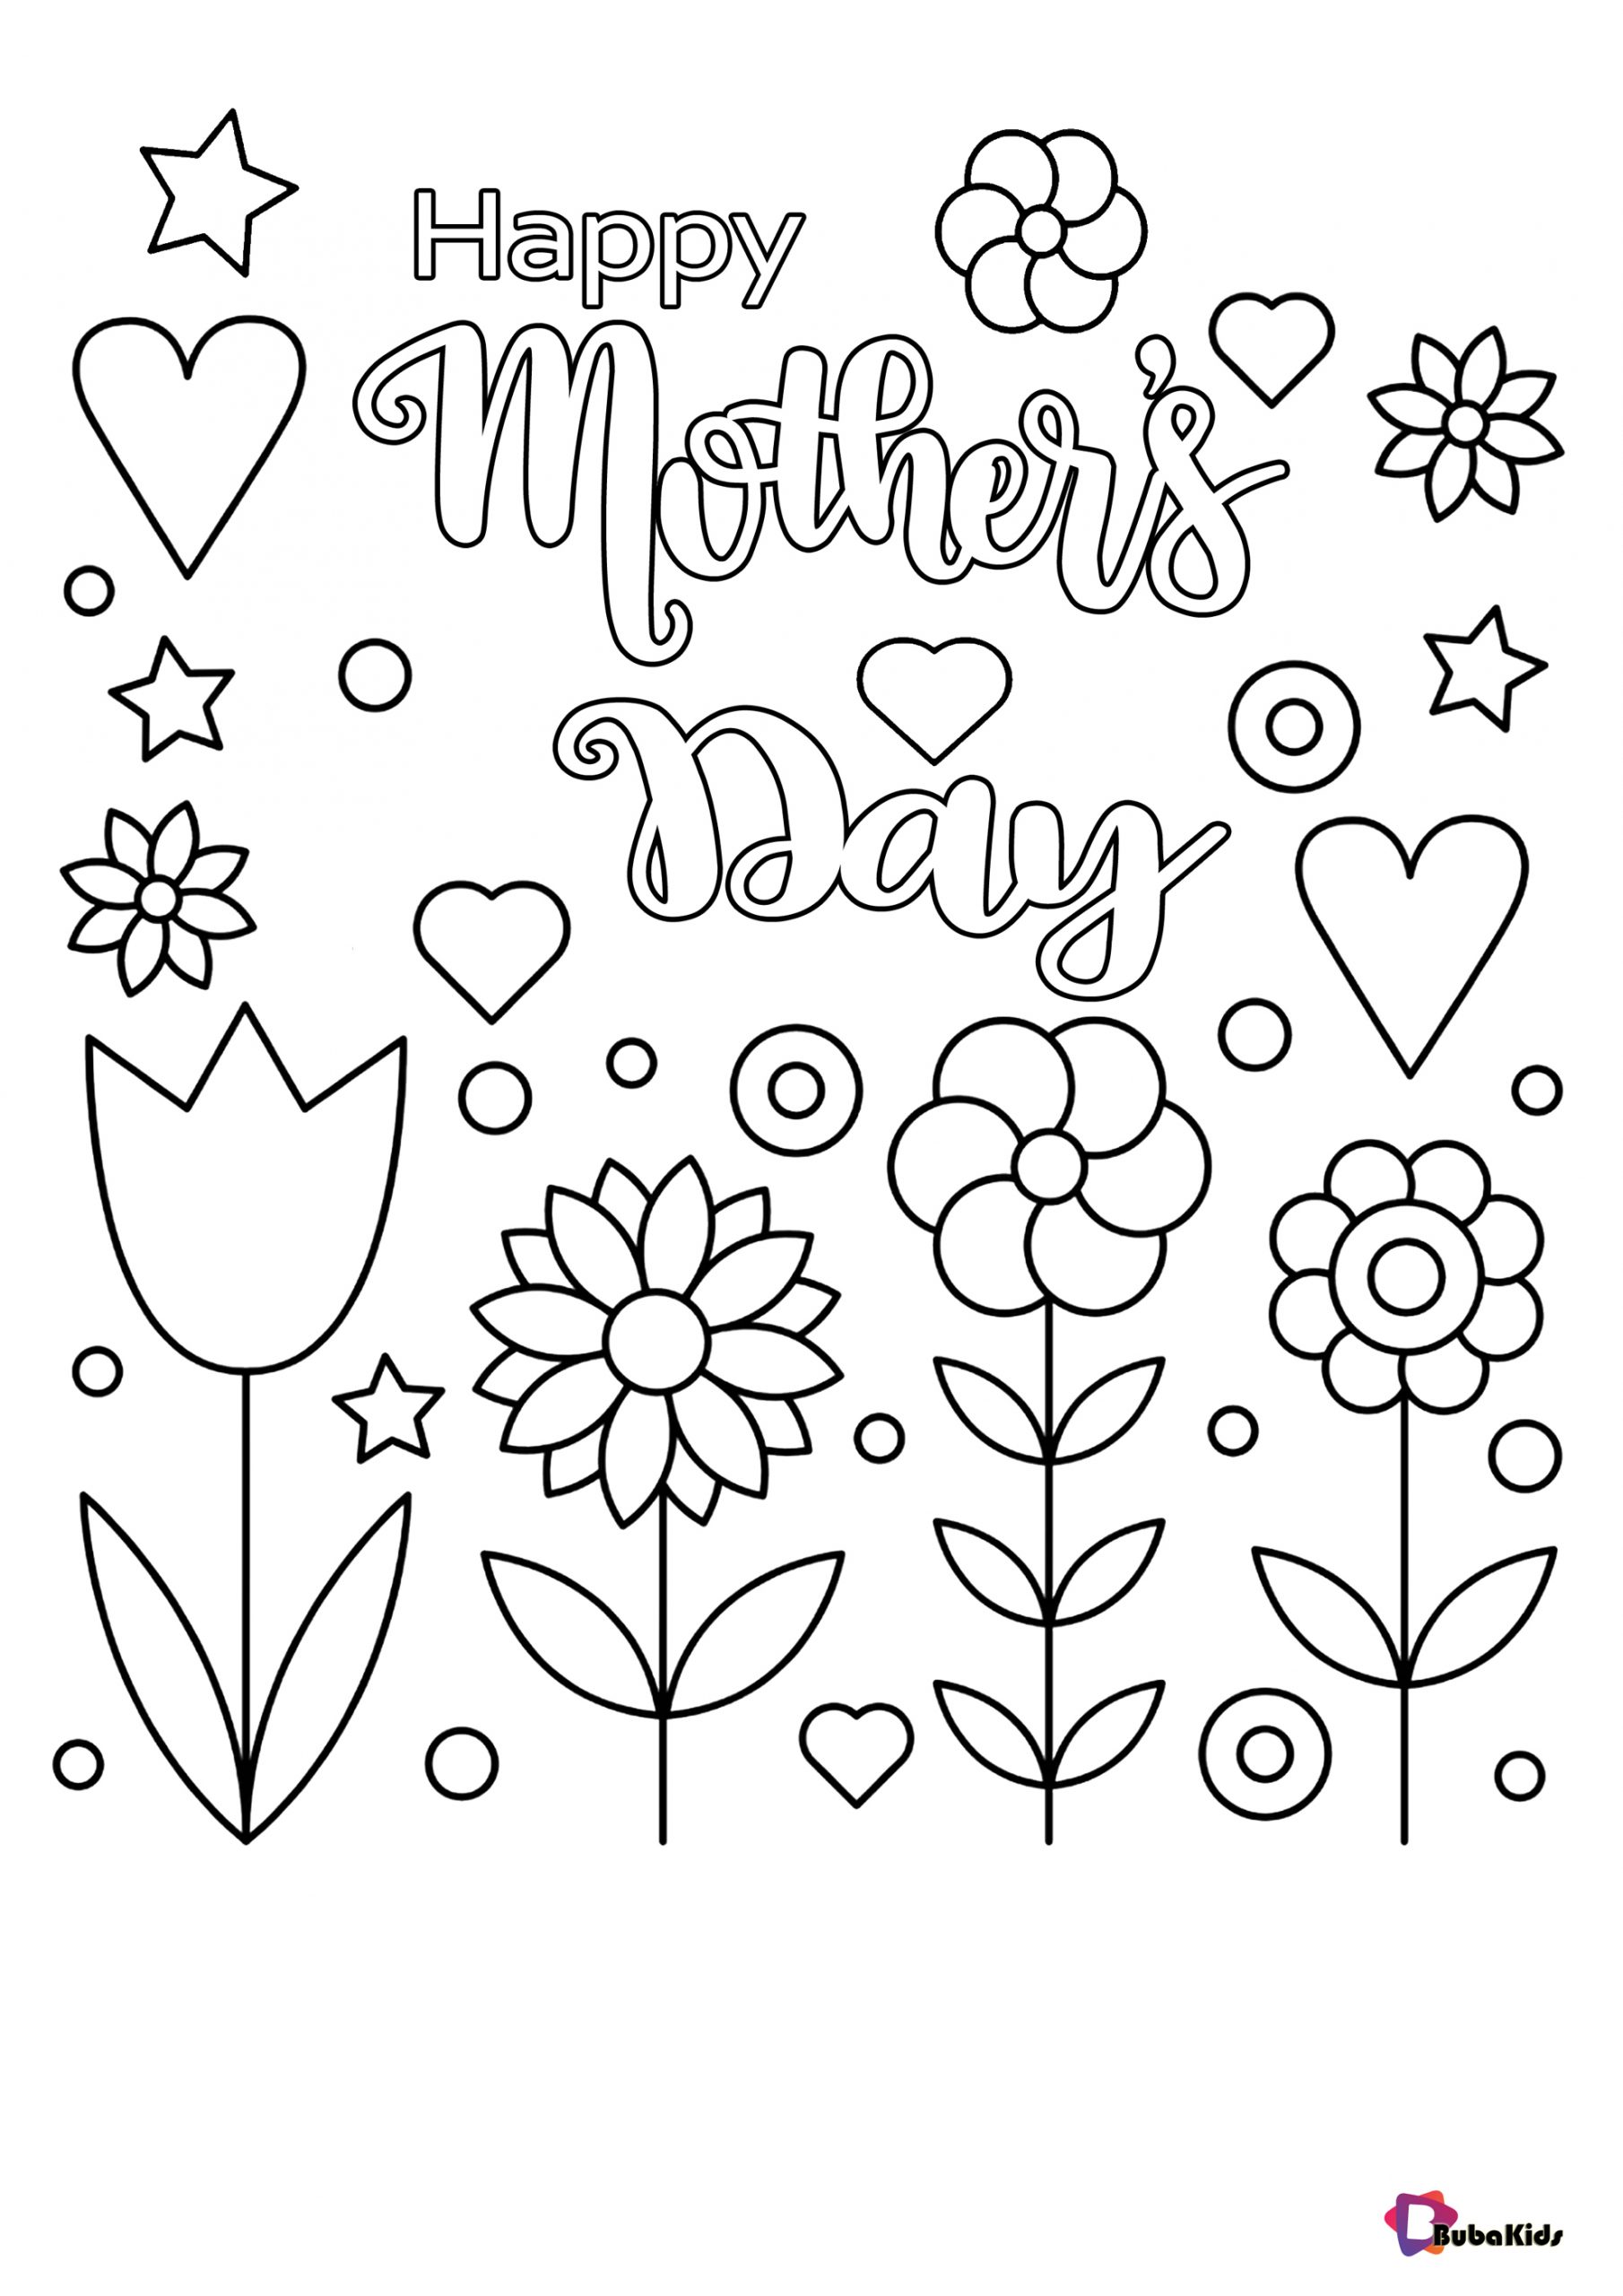 Happy mother's day coloring pages happy tulips flowers hearts